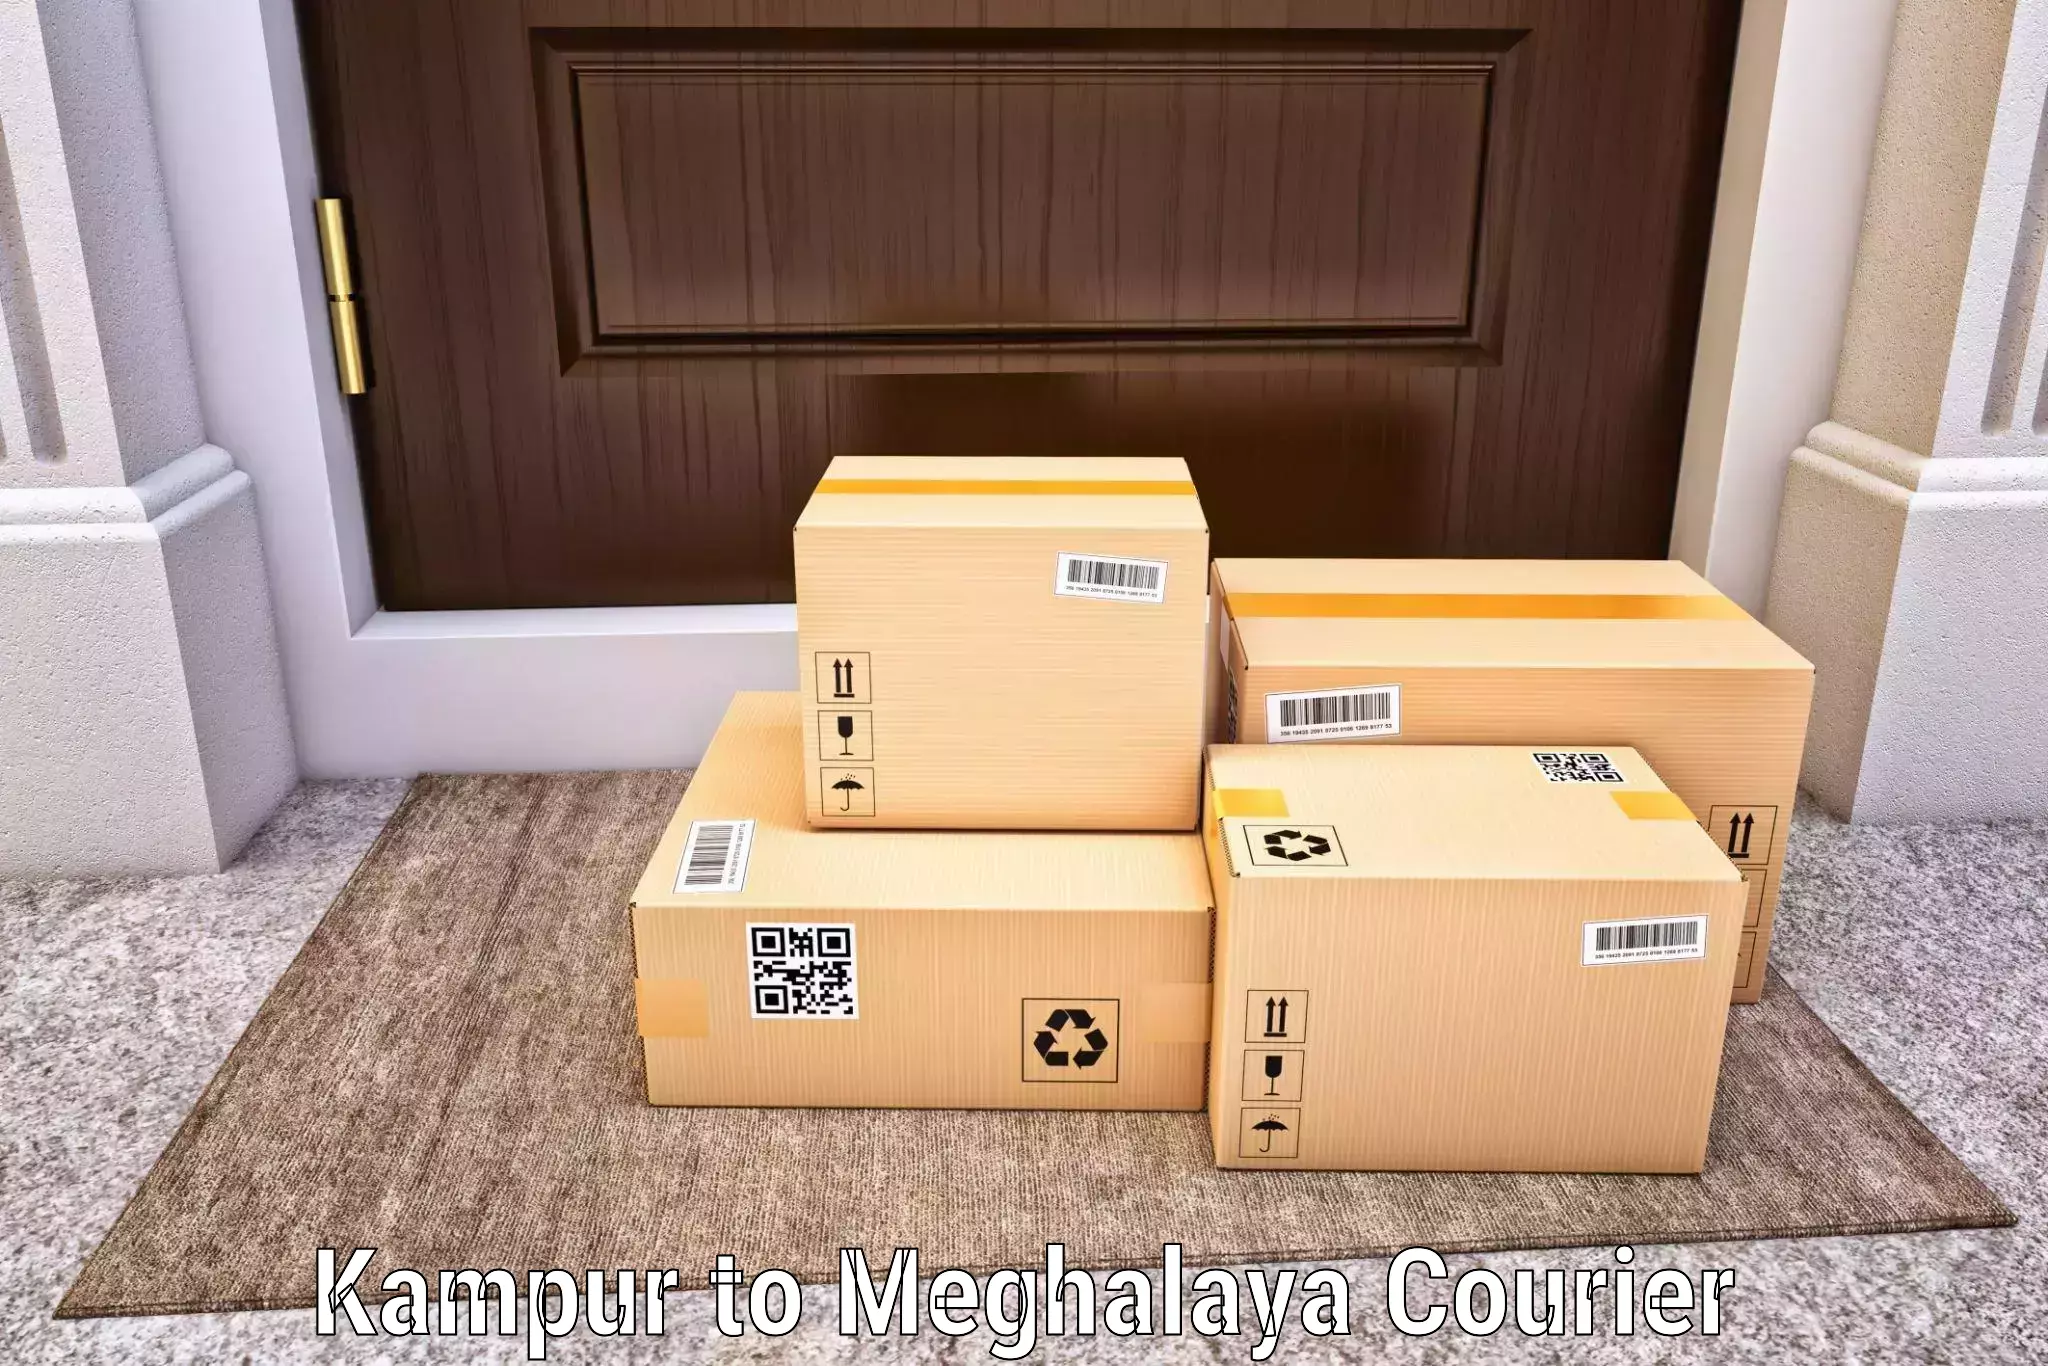 Subscription-based courier Kampur to Meghalaya